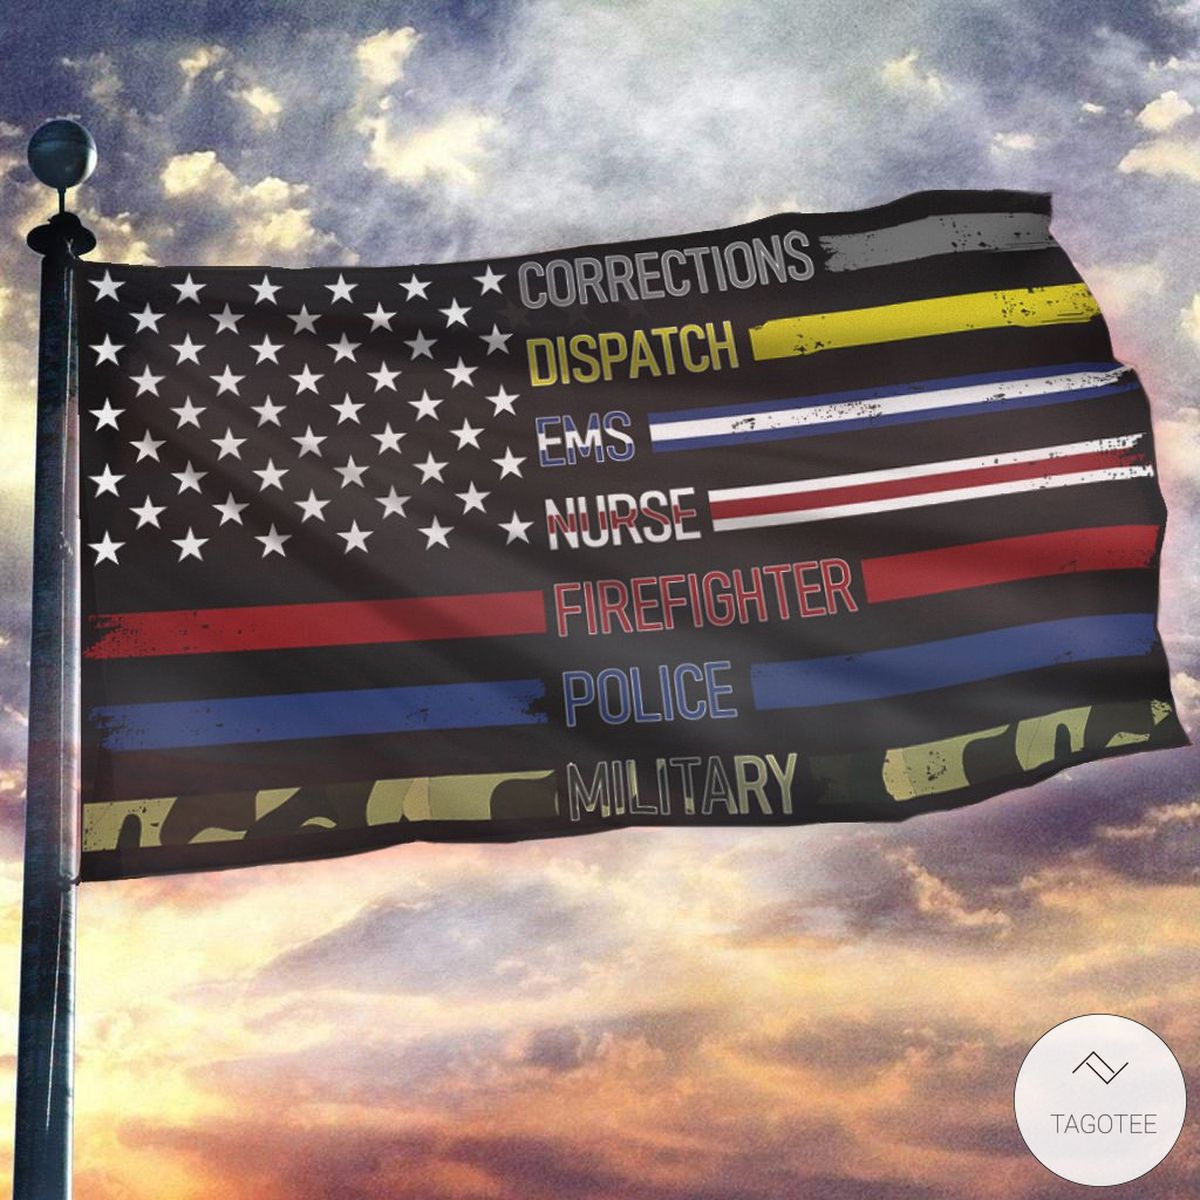 Corrections-Dispatch-Ems-Nurse-Firefighter-Police-Military-Flag